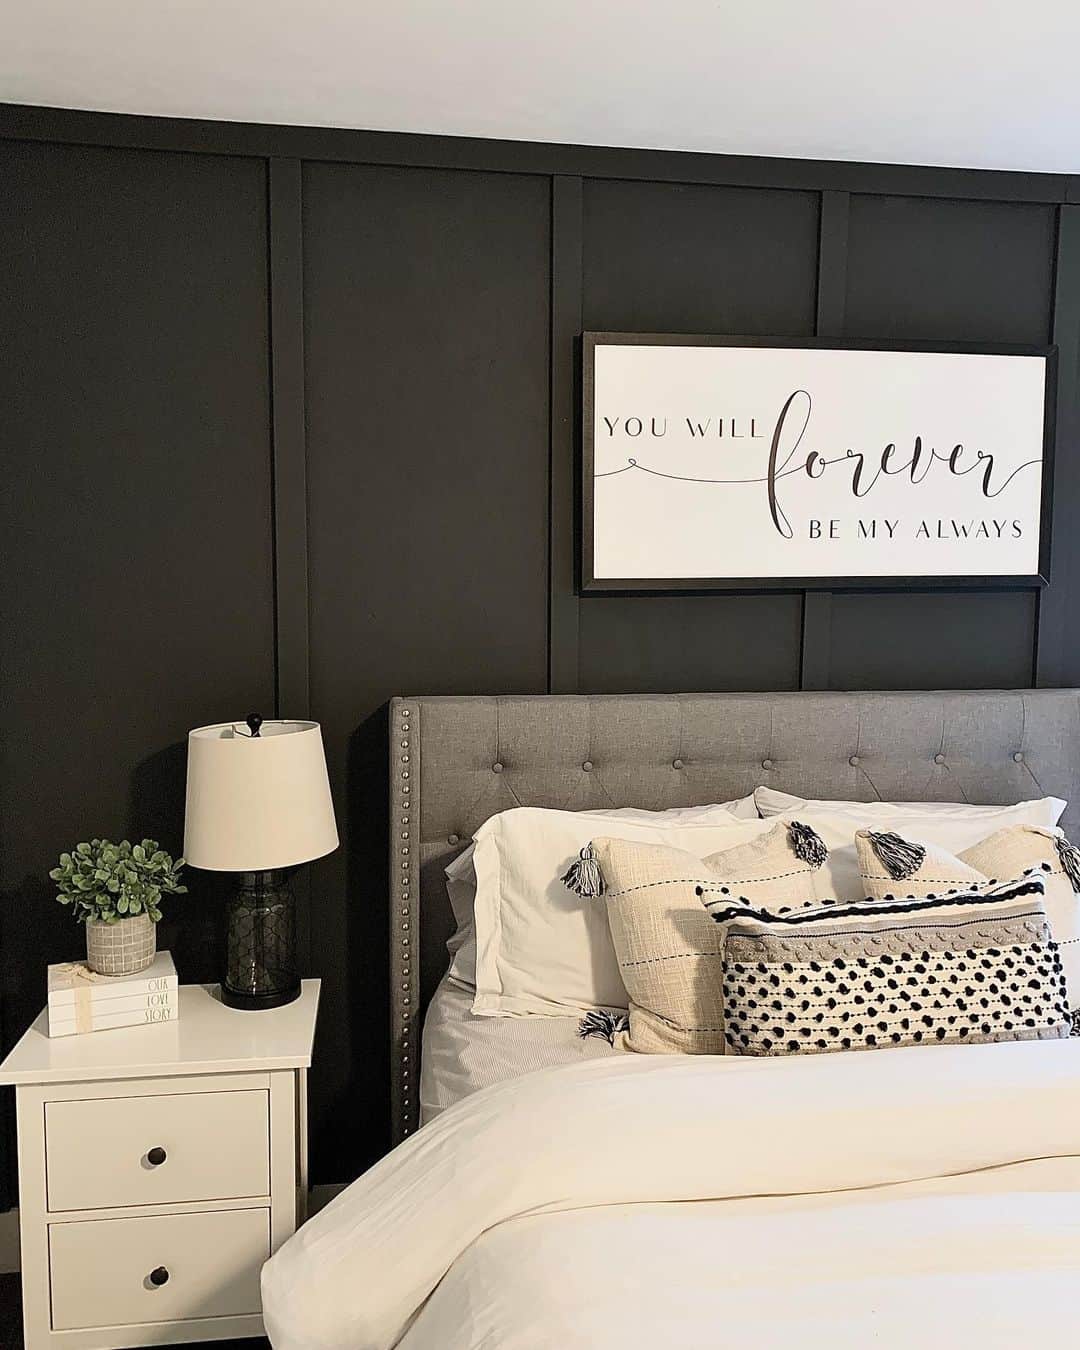 Cozy Farmhouse Bedroom in Shades of Grey, Black, and White